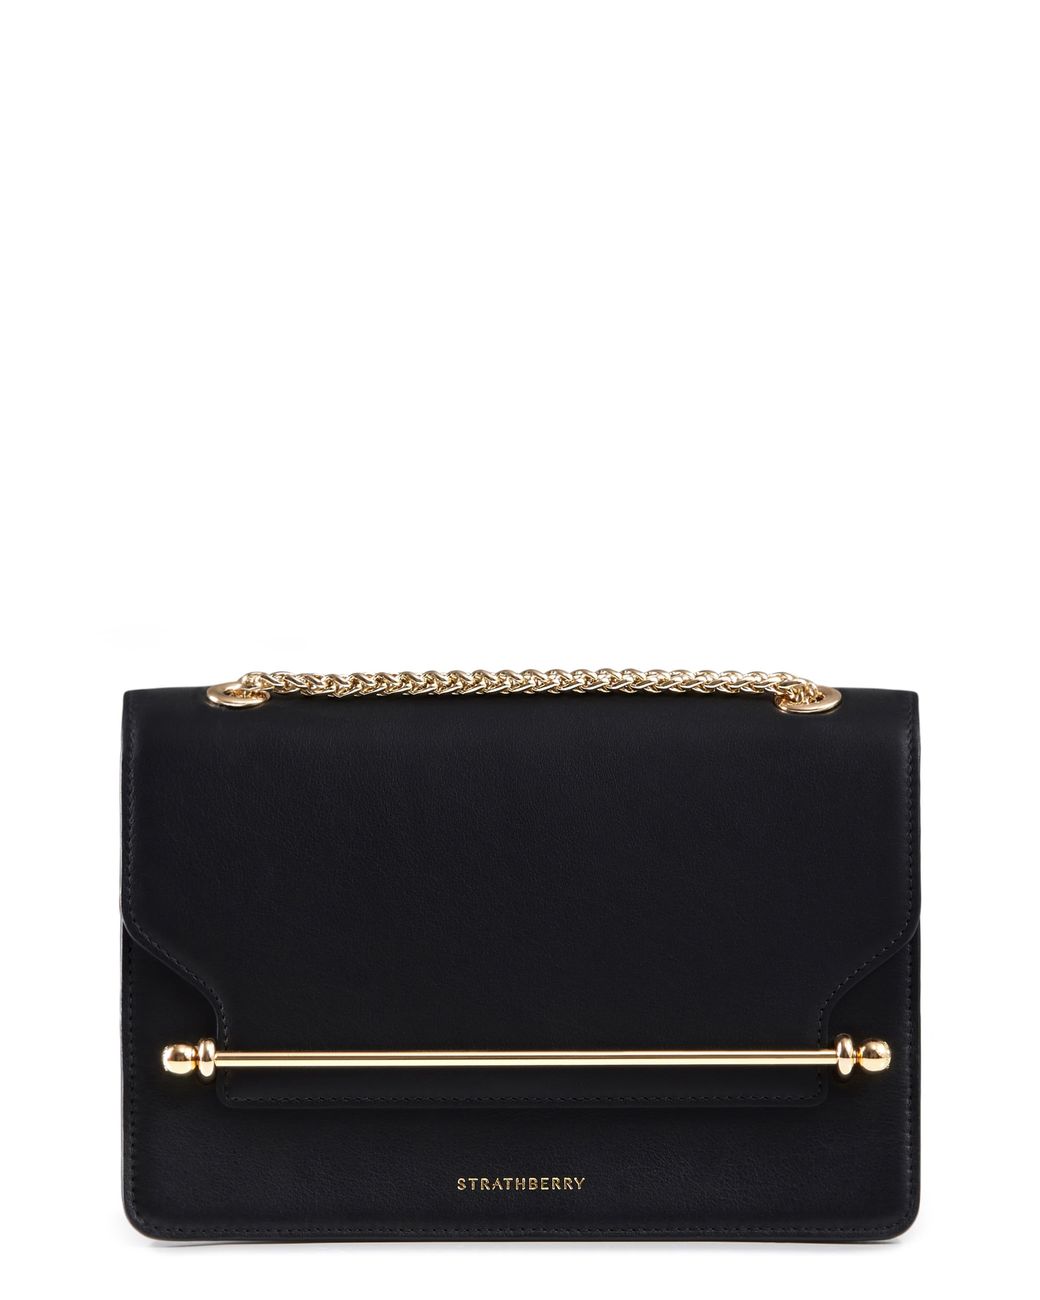 Strathberry East/west Mini Bag in Black